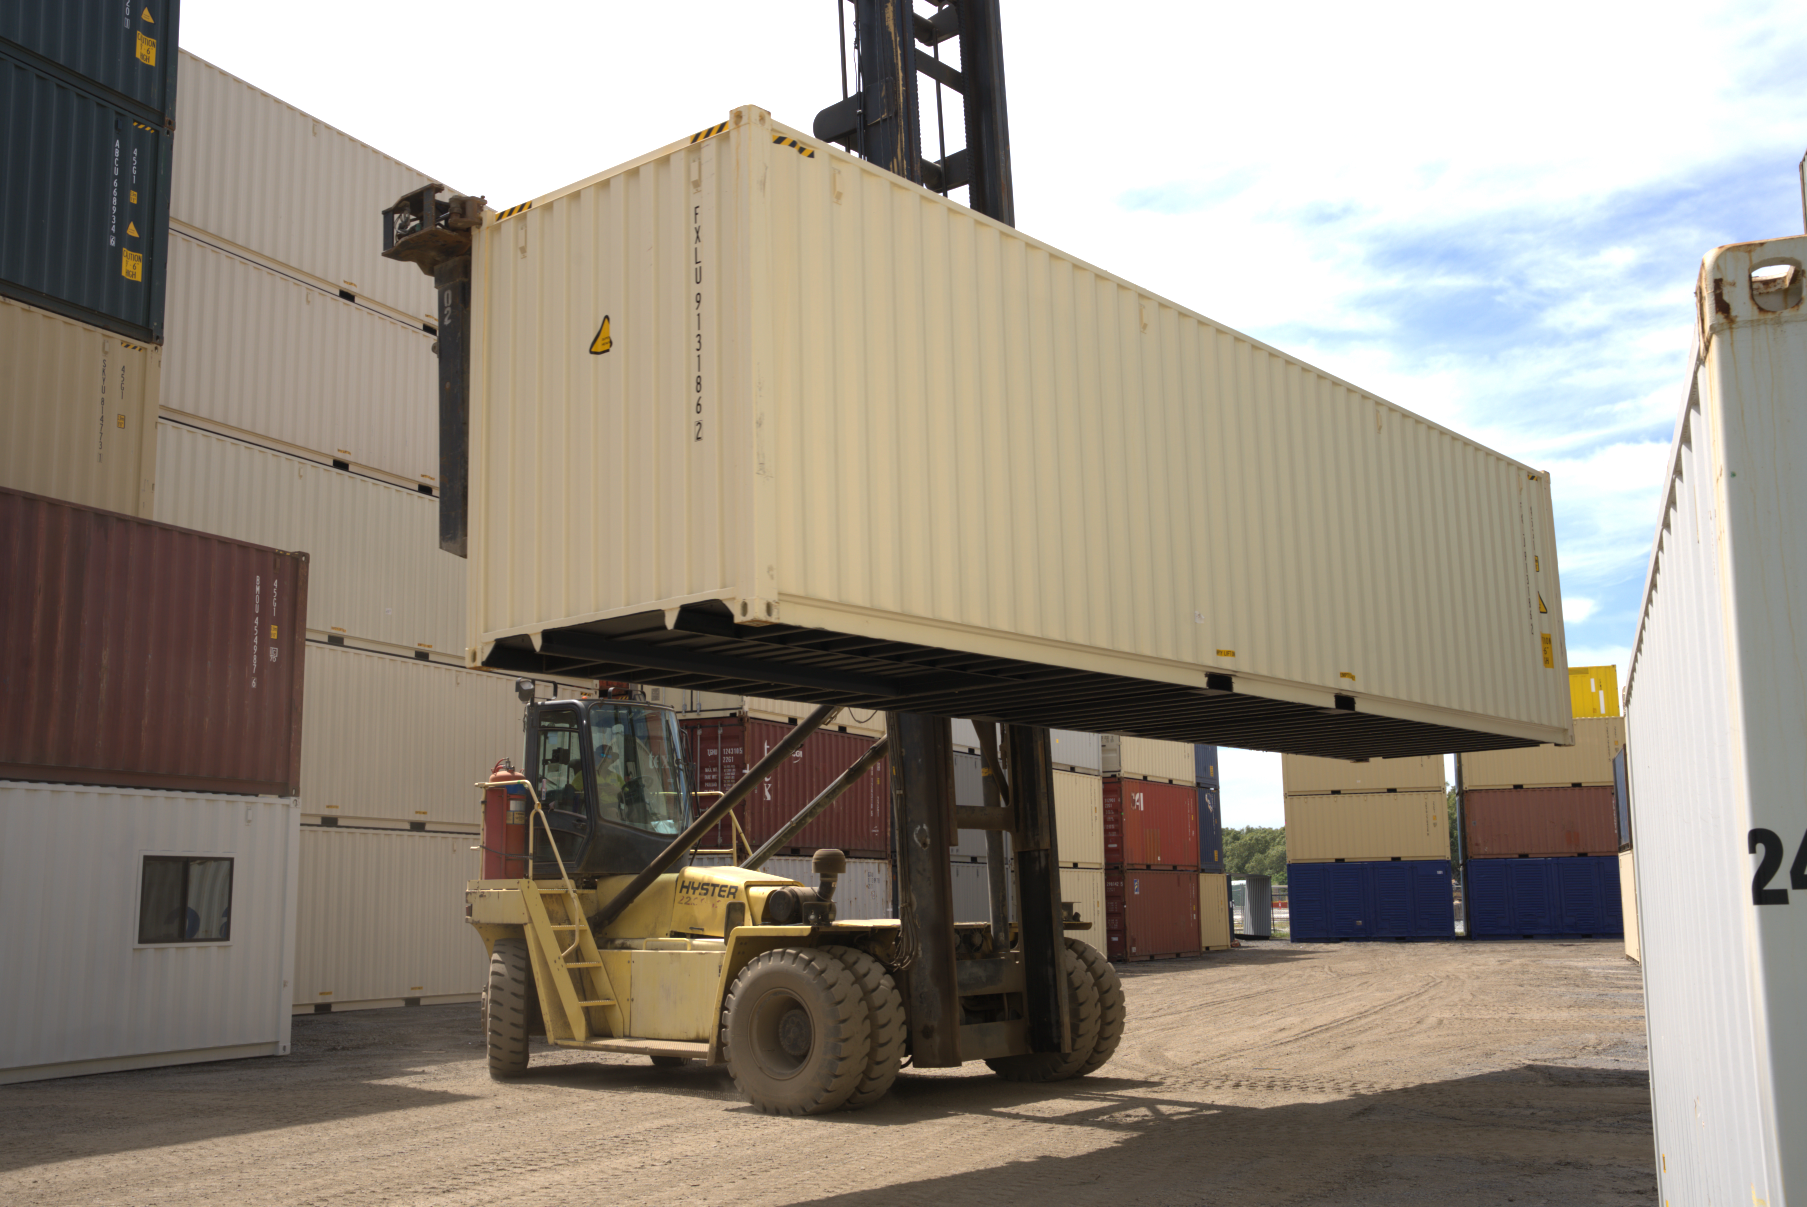 40ft shipping container being picked up by a forklift